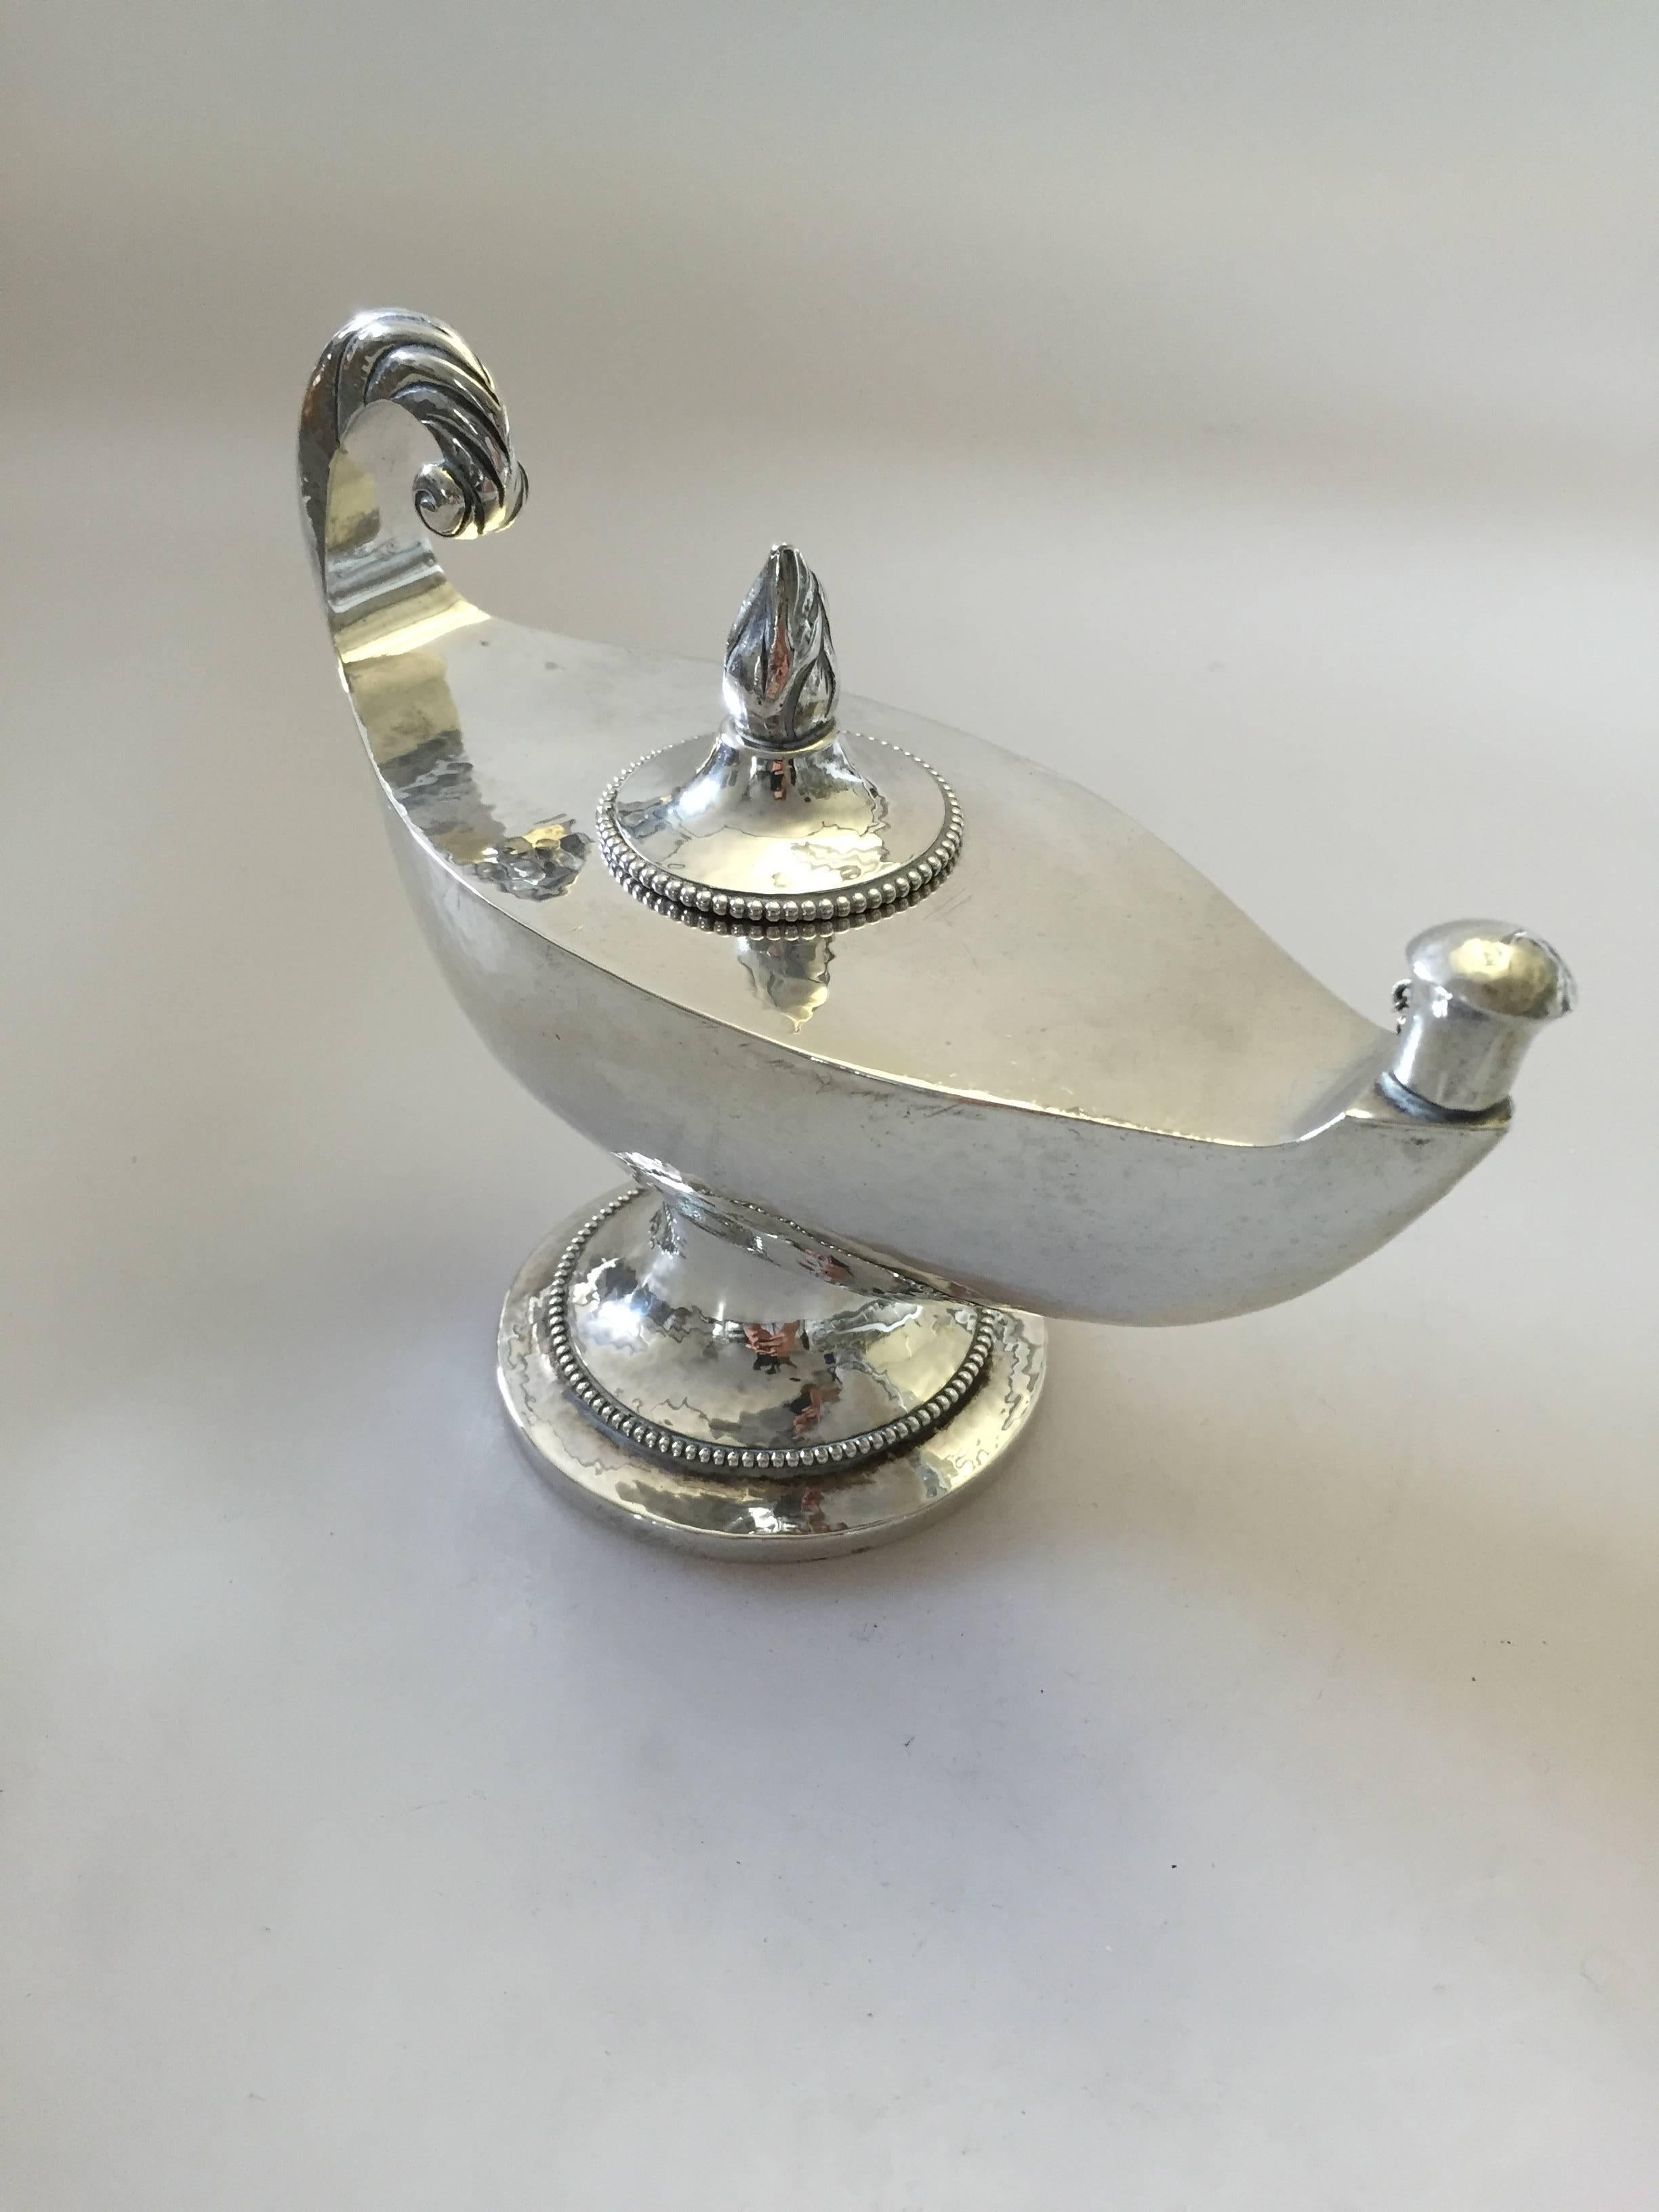 A Mogens Ballin Large Oil Lamp in Silver. The lamp measures 19 cm x 14 cm ( 7 1/2